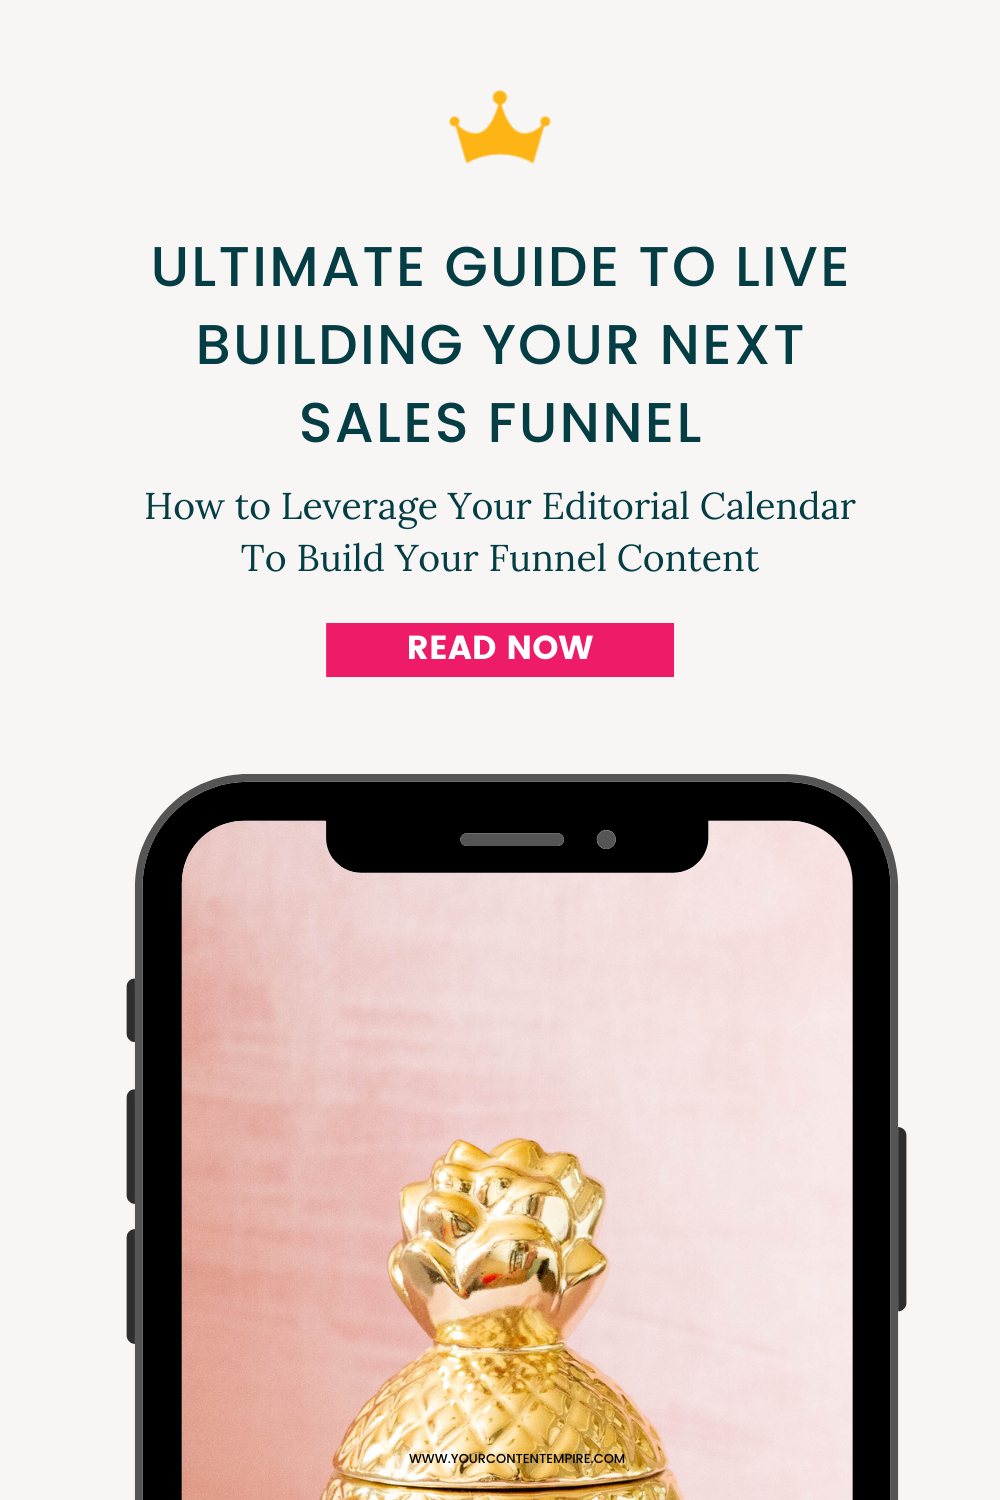 Ultimate Guide to Live Building Your Next Sales Funnel